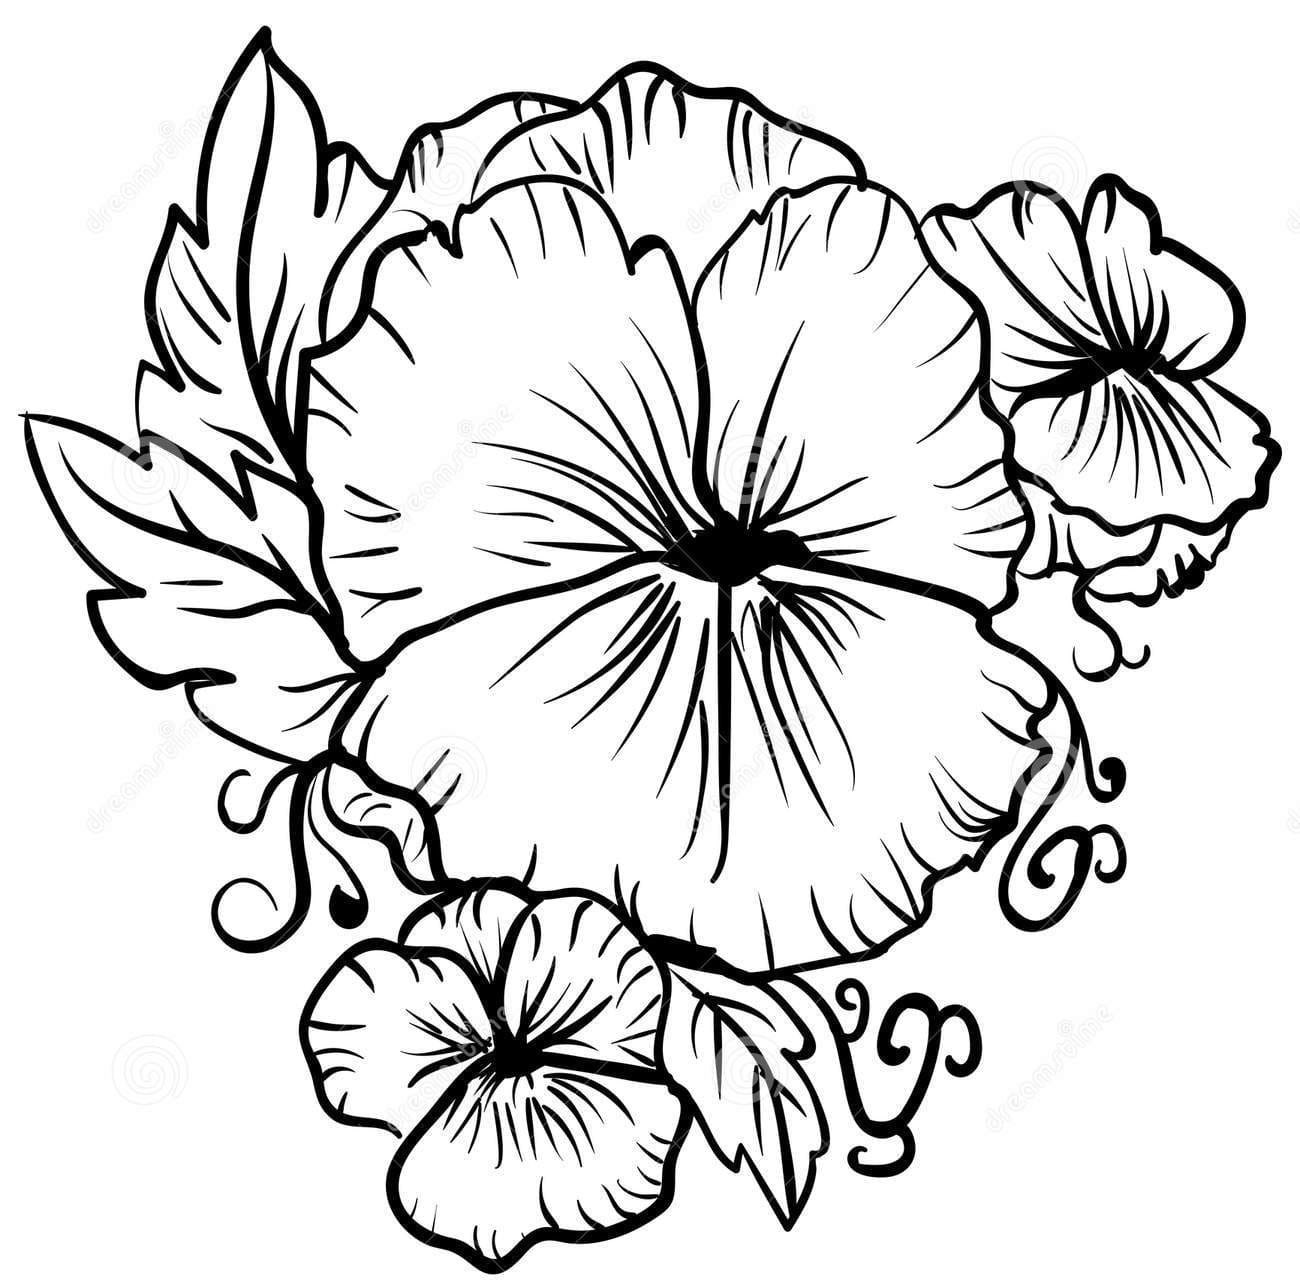 Pansy Sketch Black and White